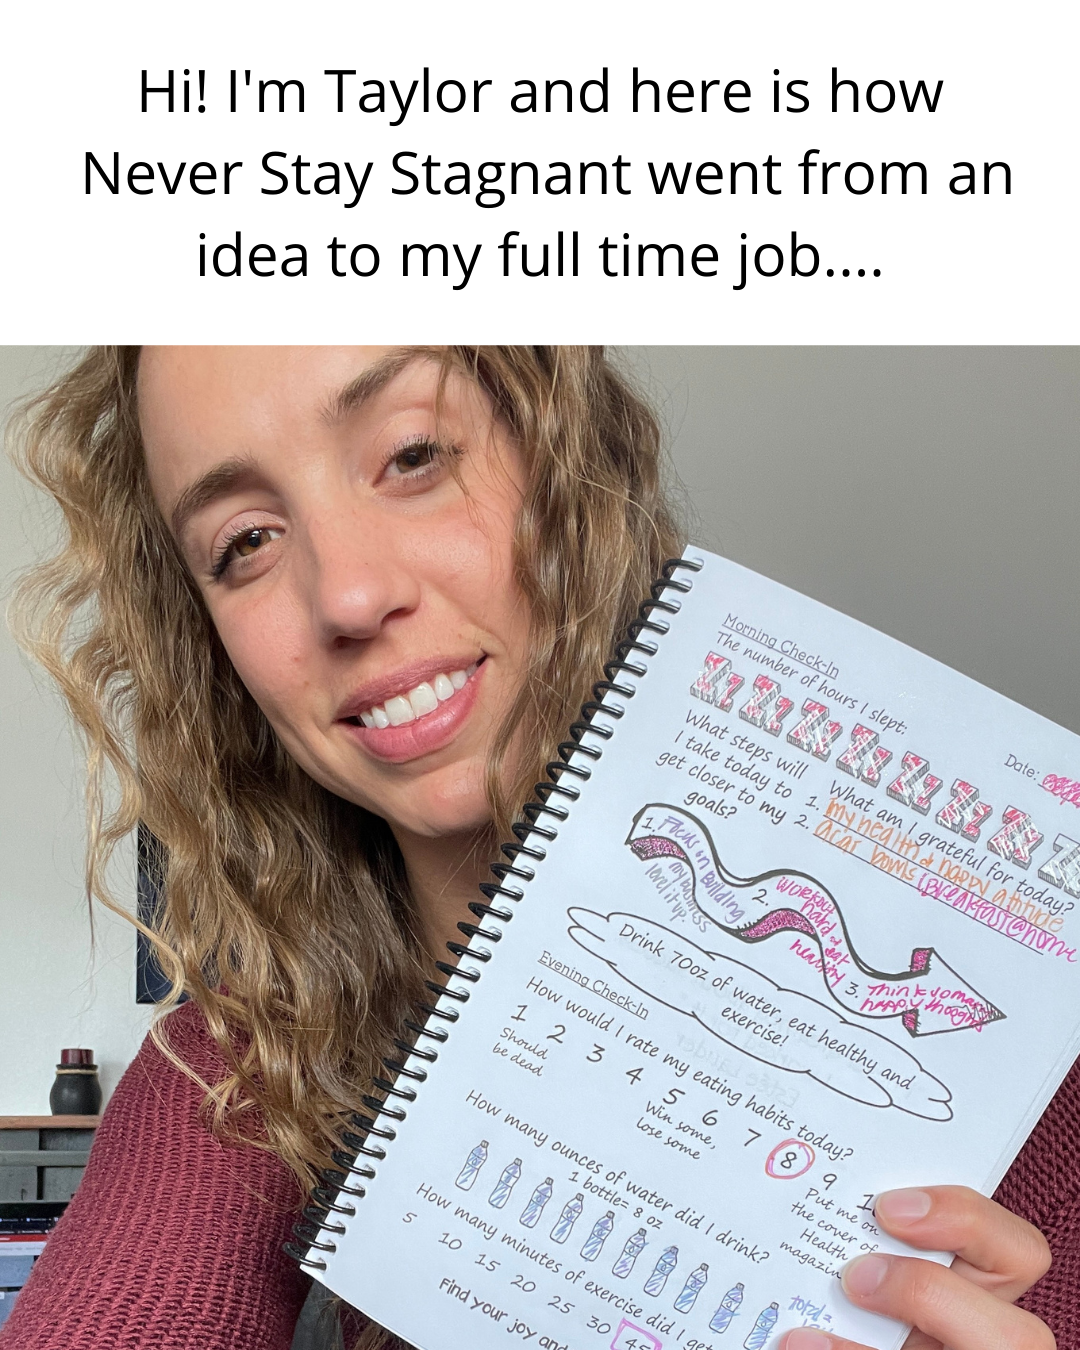 A Short Origin Story of Never Stay Stagnant